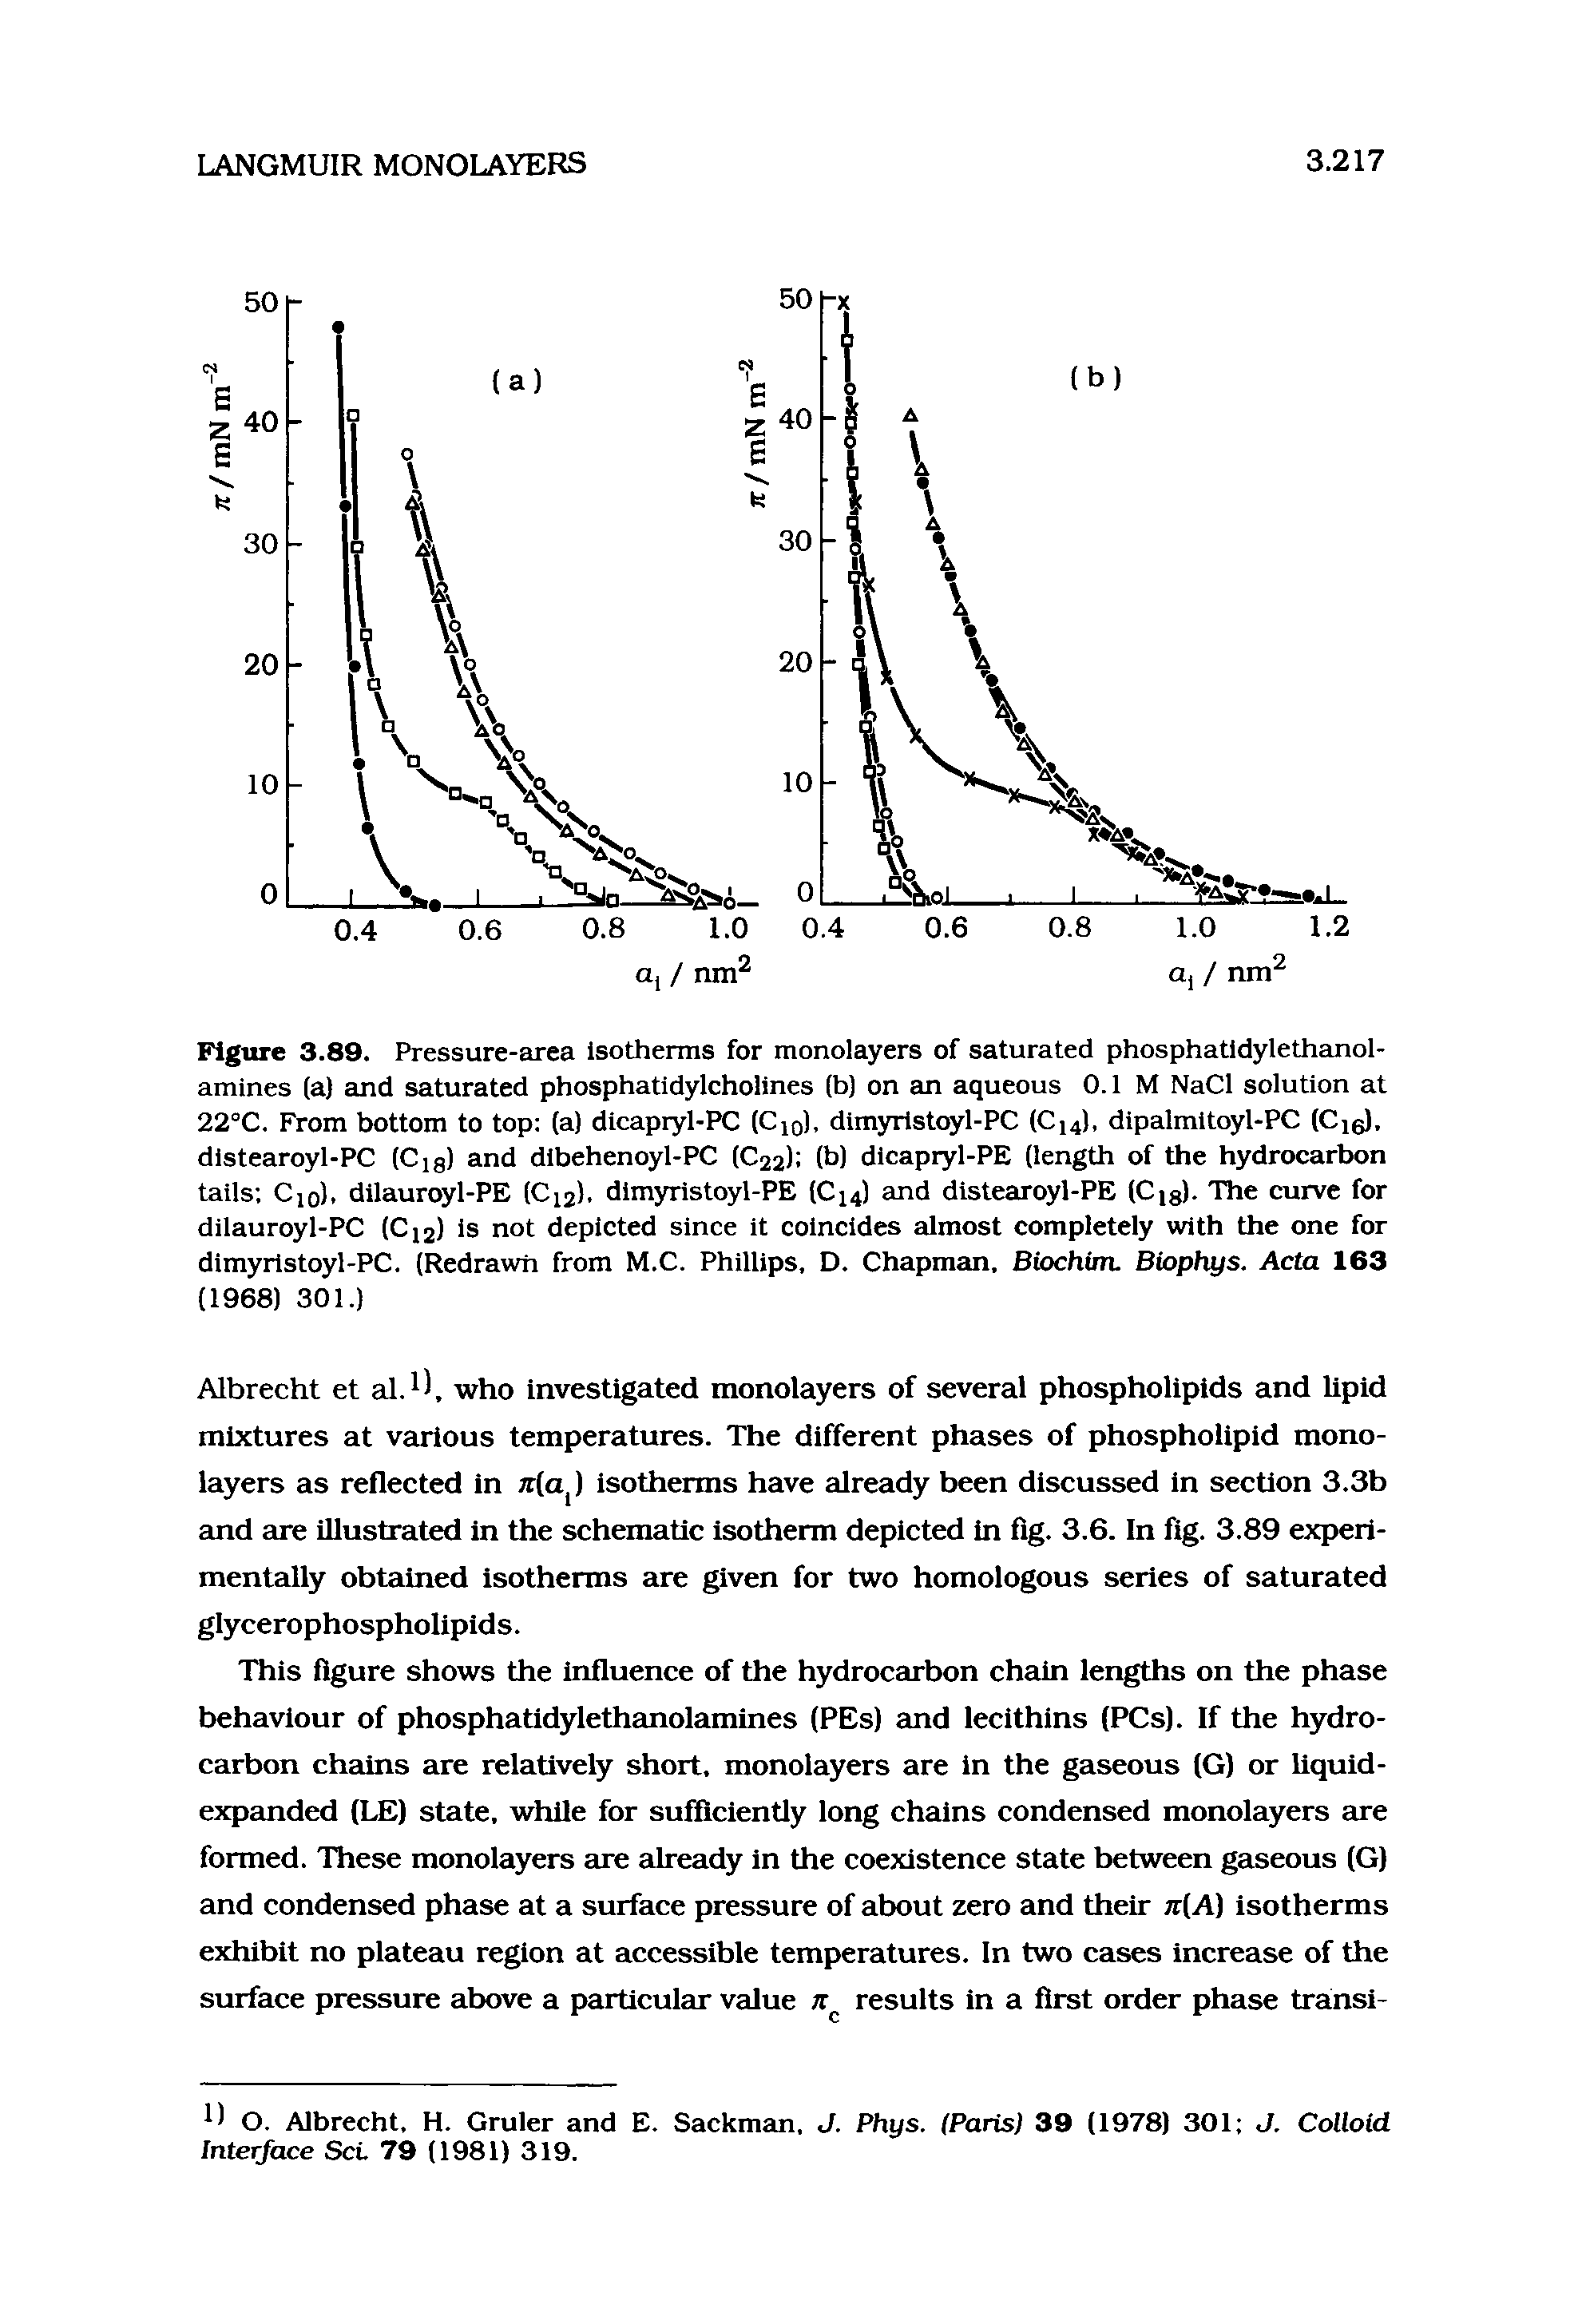 Figure 3.89. Pressure-area Isotherms for monolayers of saturated phosphatidylethanol-amlnes (a) and saturated phosphatidylcholines (b) on an aqueous 0.1 M NaCl solution at 22°C. From bottom to top (a) dicapryl-PC (Ciq), dimyrlstoyl-PC (C14), dipalmitoyl-PC (Cie). distearoyl-PC (Cig) and dibehenoyl-PC (C22) (b) dicapryl-PE (length of the hydrocarbon tails Cio). dilauroyl-PE (C12). dimyristoyl-PE (C14) and distearoyl-PE (Cis). The curve for dilauroyl-PC (Ci2) is not depicted since it coincides almost completely with the one for dimyrlstoyl-PC. (Redrawn from M.C. Phillips, D. Chapman, Biochim. Biophys. Acta 163 (1968) 301.)...